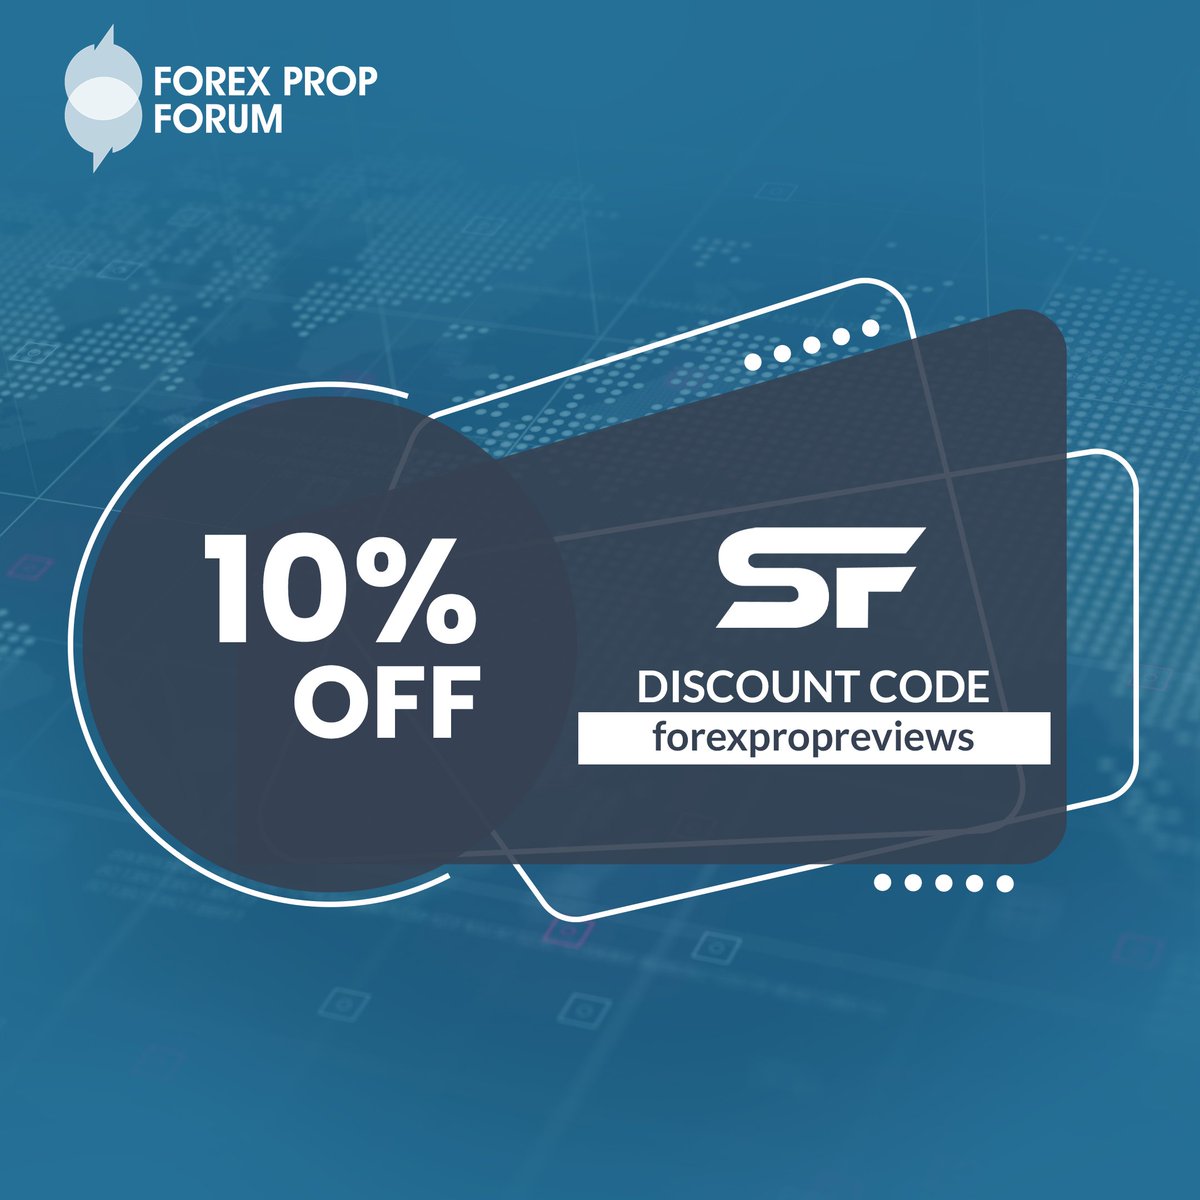 🚨 Exciting news for traders! Super Funded is offering a 10% discount on all challenges. Use promo code 'forexpropreviews' at checkout to take advantage of the offer and kickstart your trading journey today! 💰
#Forex #Trading #Discount #SuperFunded #PropFirms